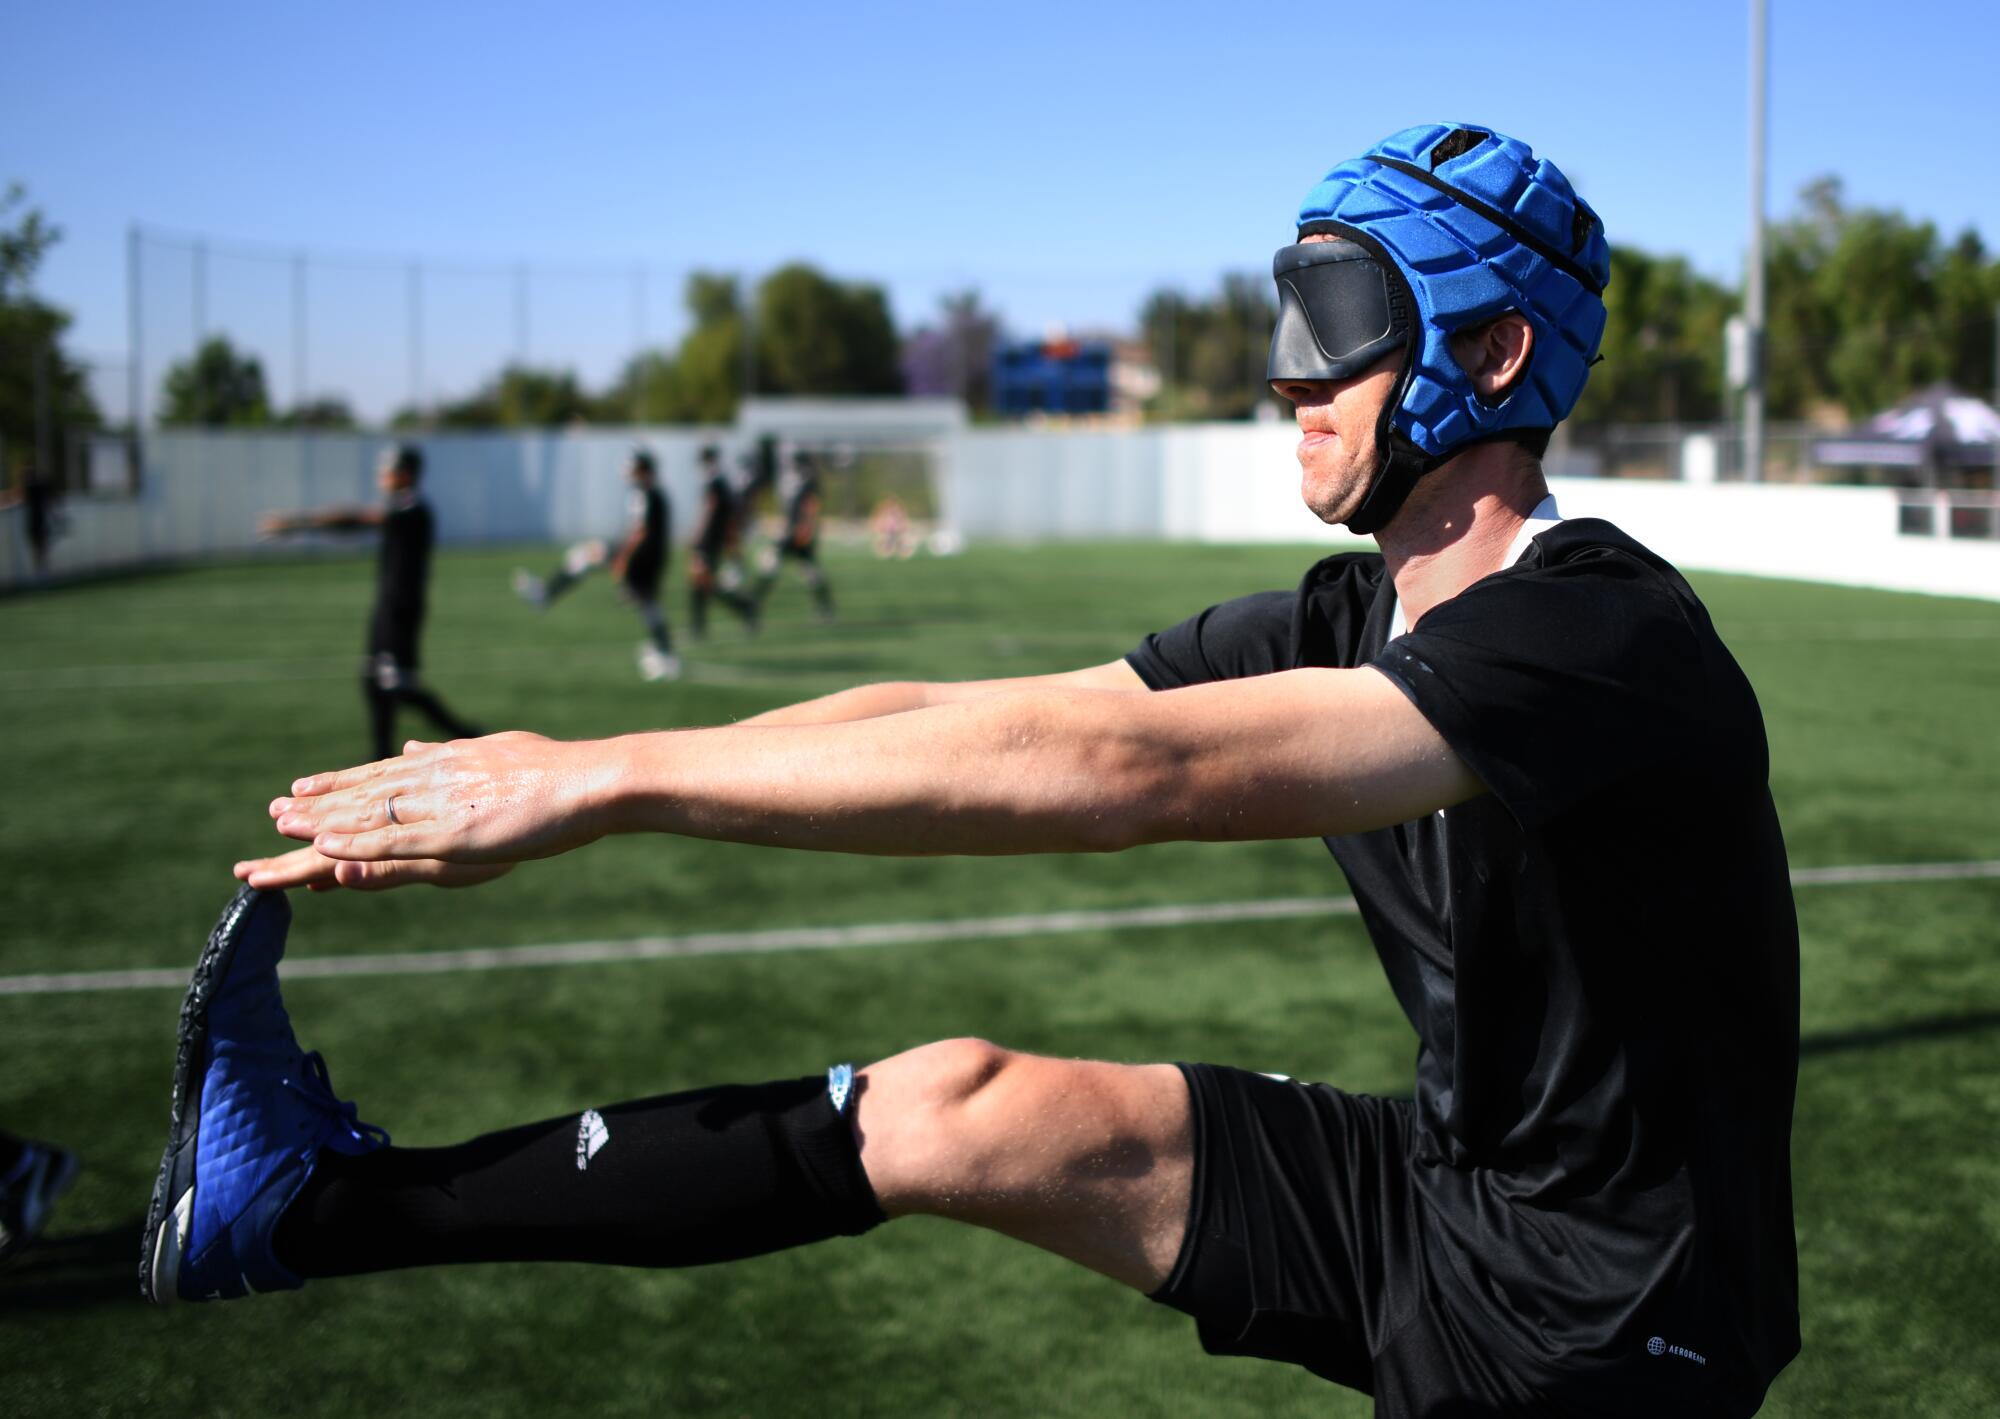 Blind soccer player Charles E. Catherine-Caldaro wears a padded helmet and goggles while extending his leg to stretch